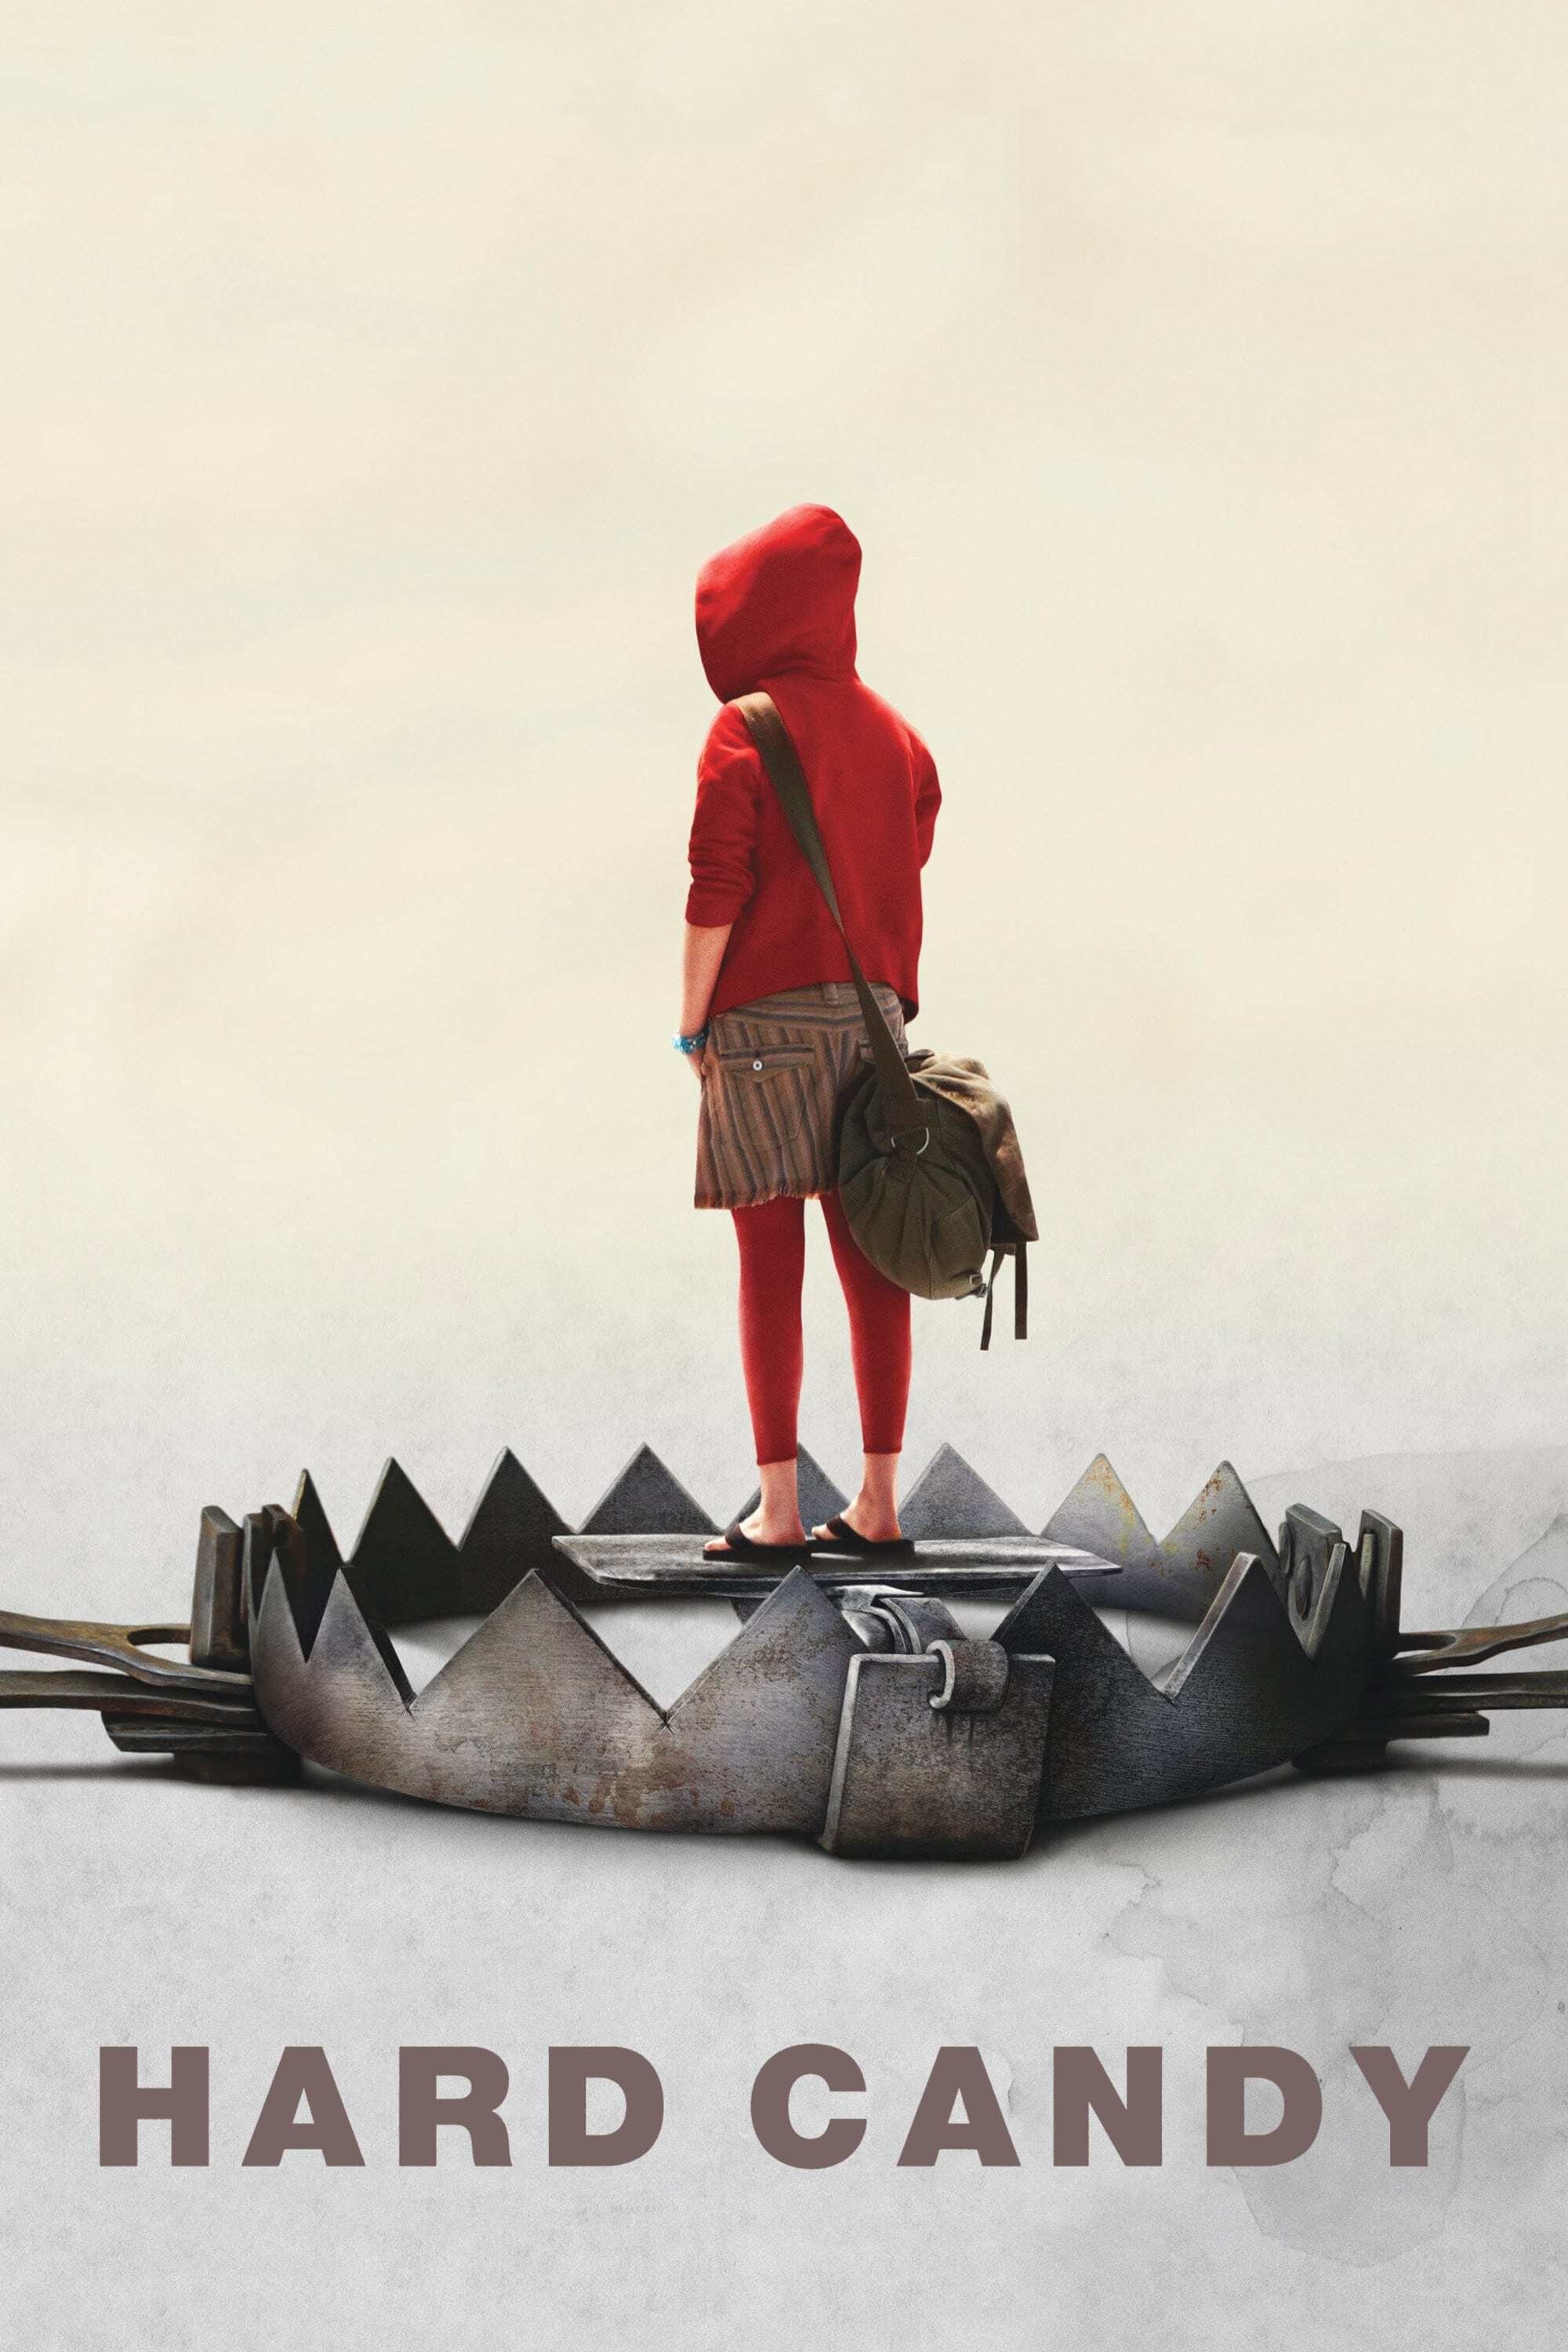 Hard Candy Movie poster